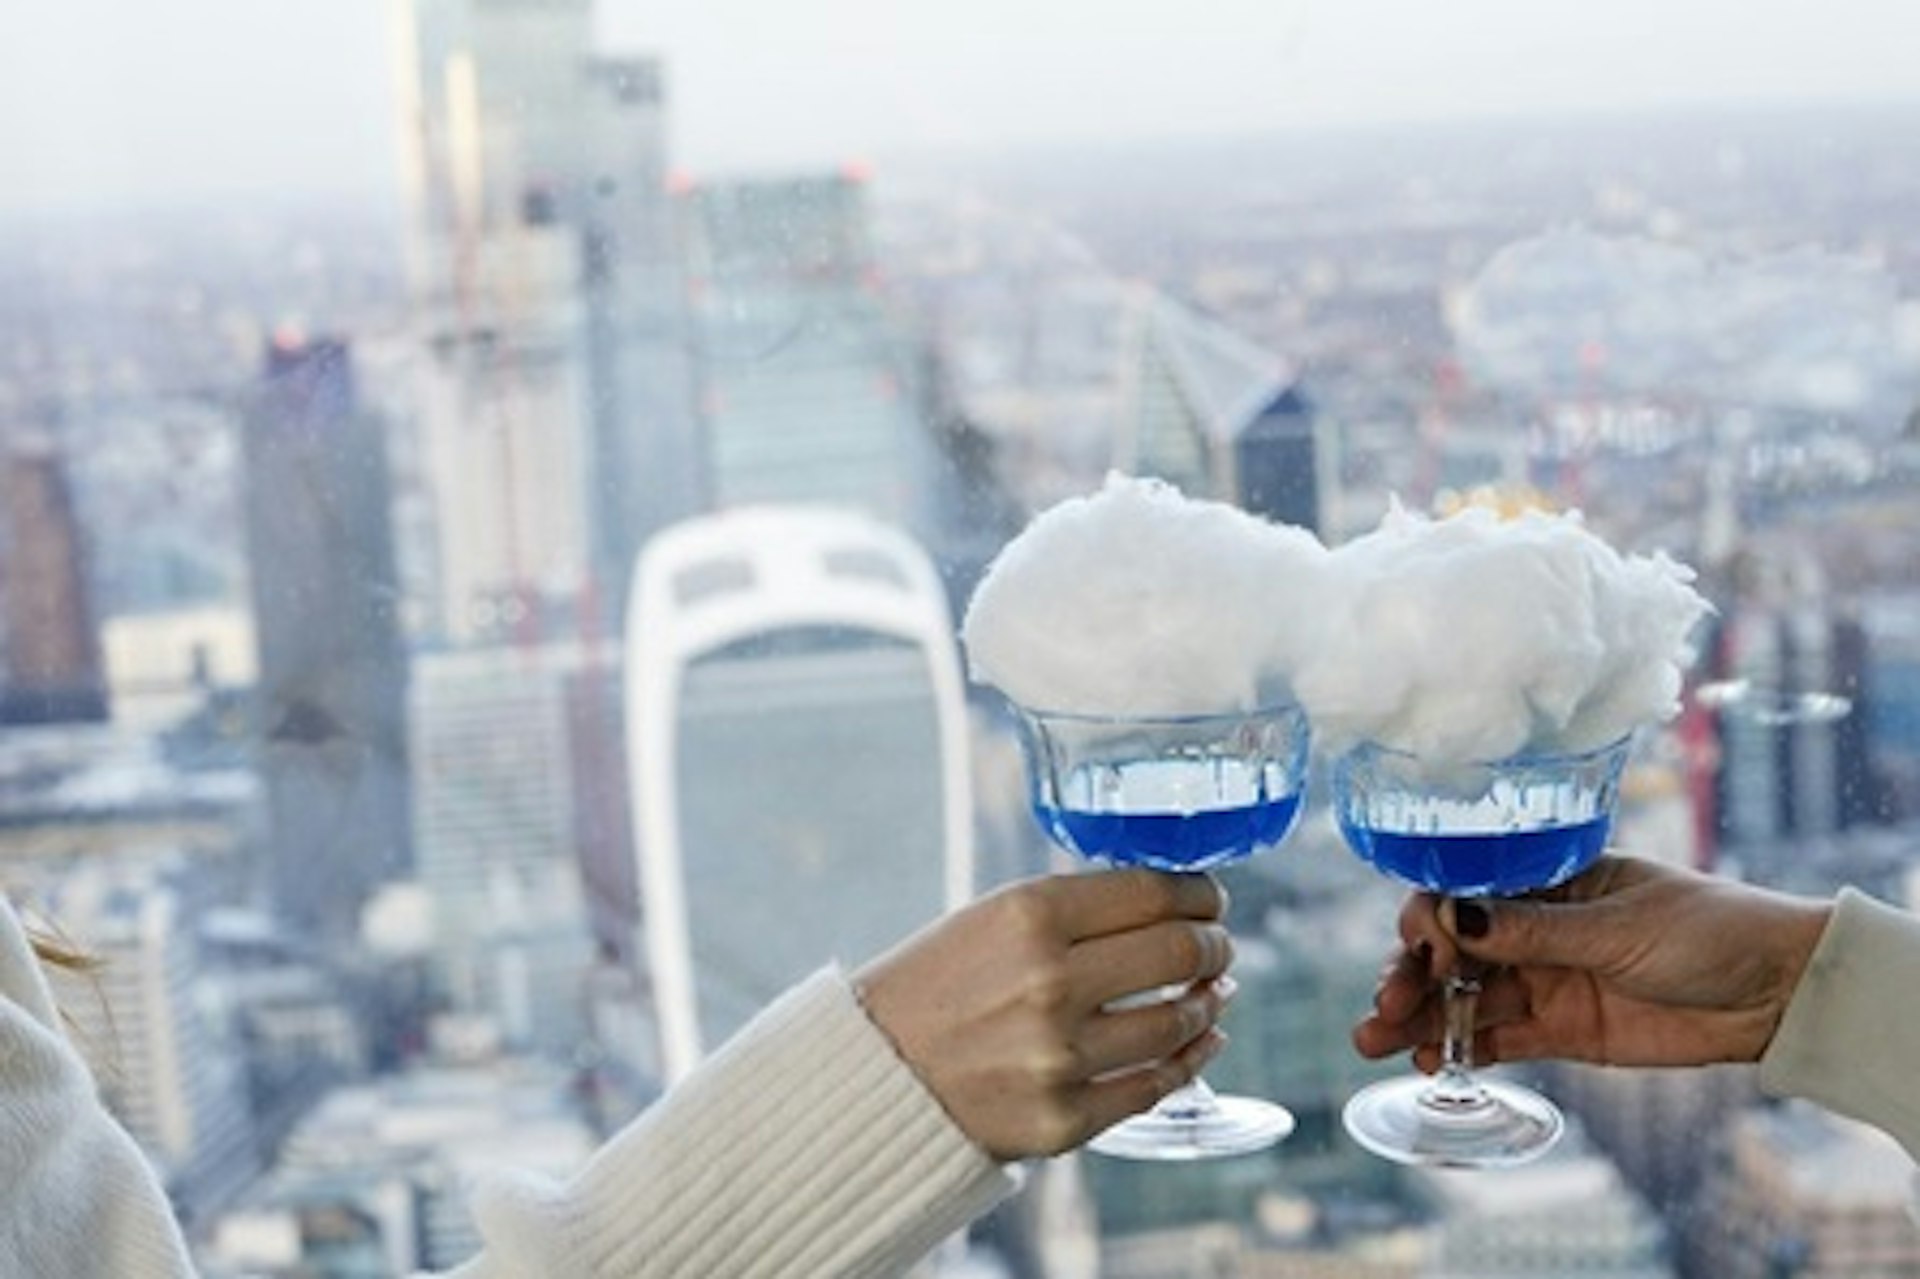 Visit to The View from The Shard with Signature Cocktail and Souvenir Photos for Two